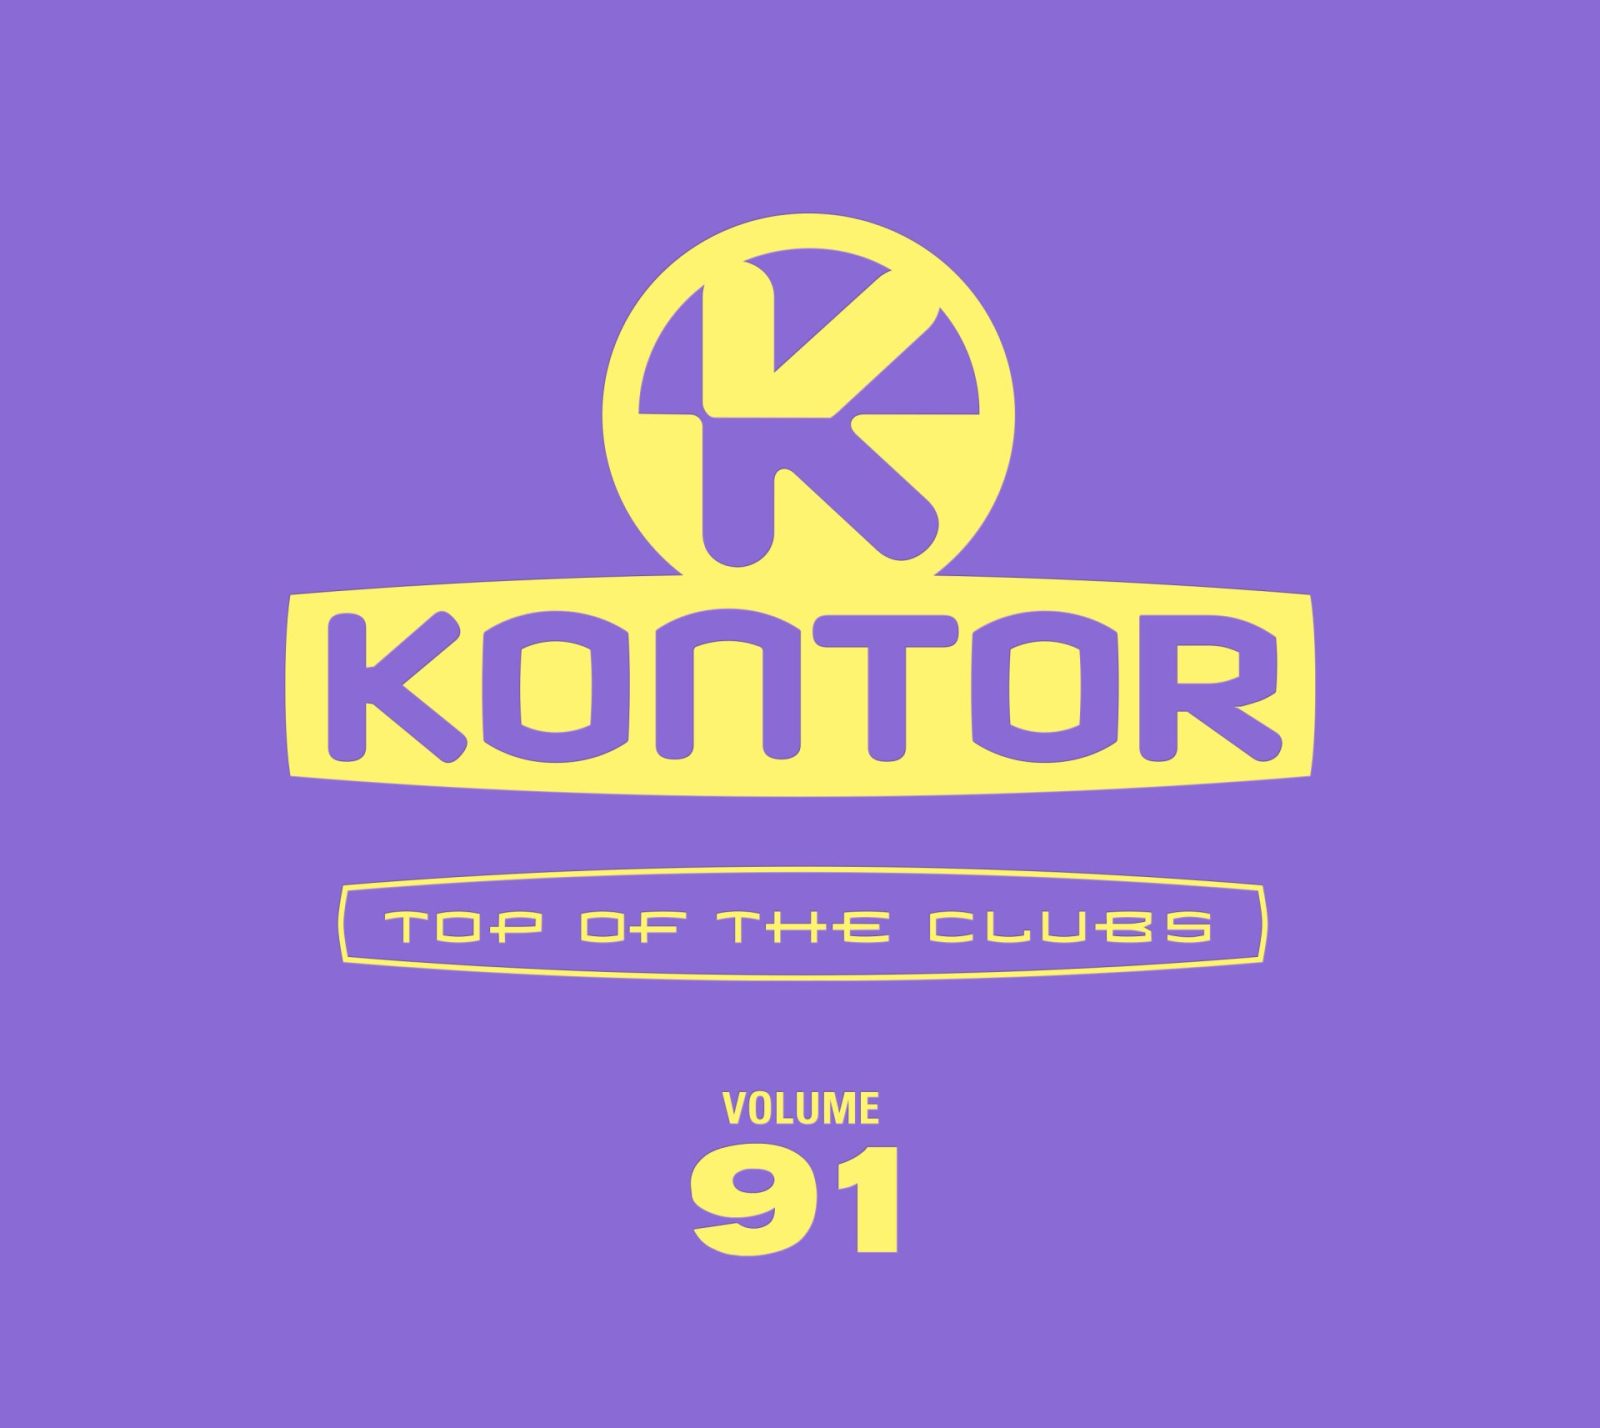 „Kontor Top Of The Clubs“ Volume 91